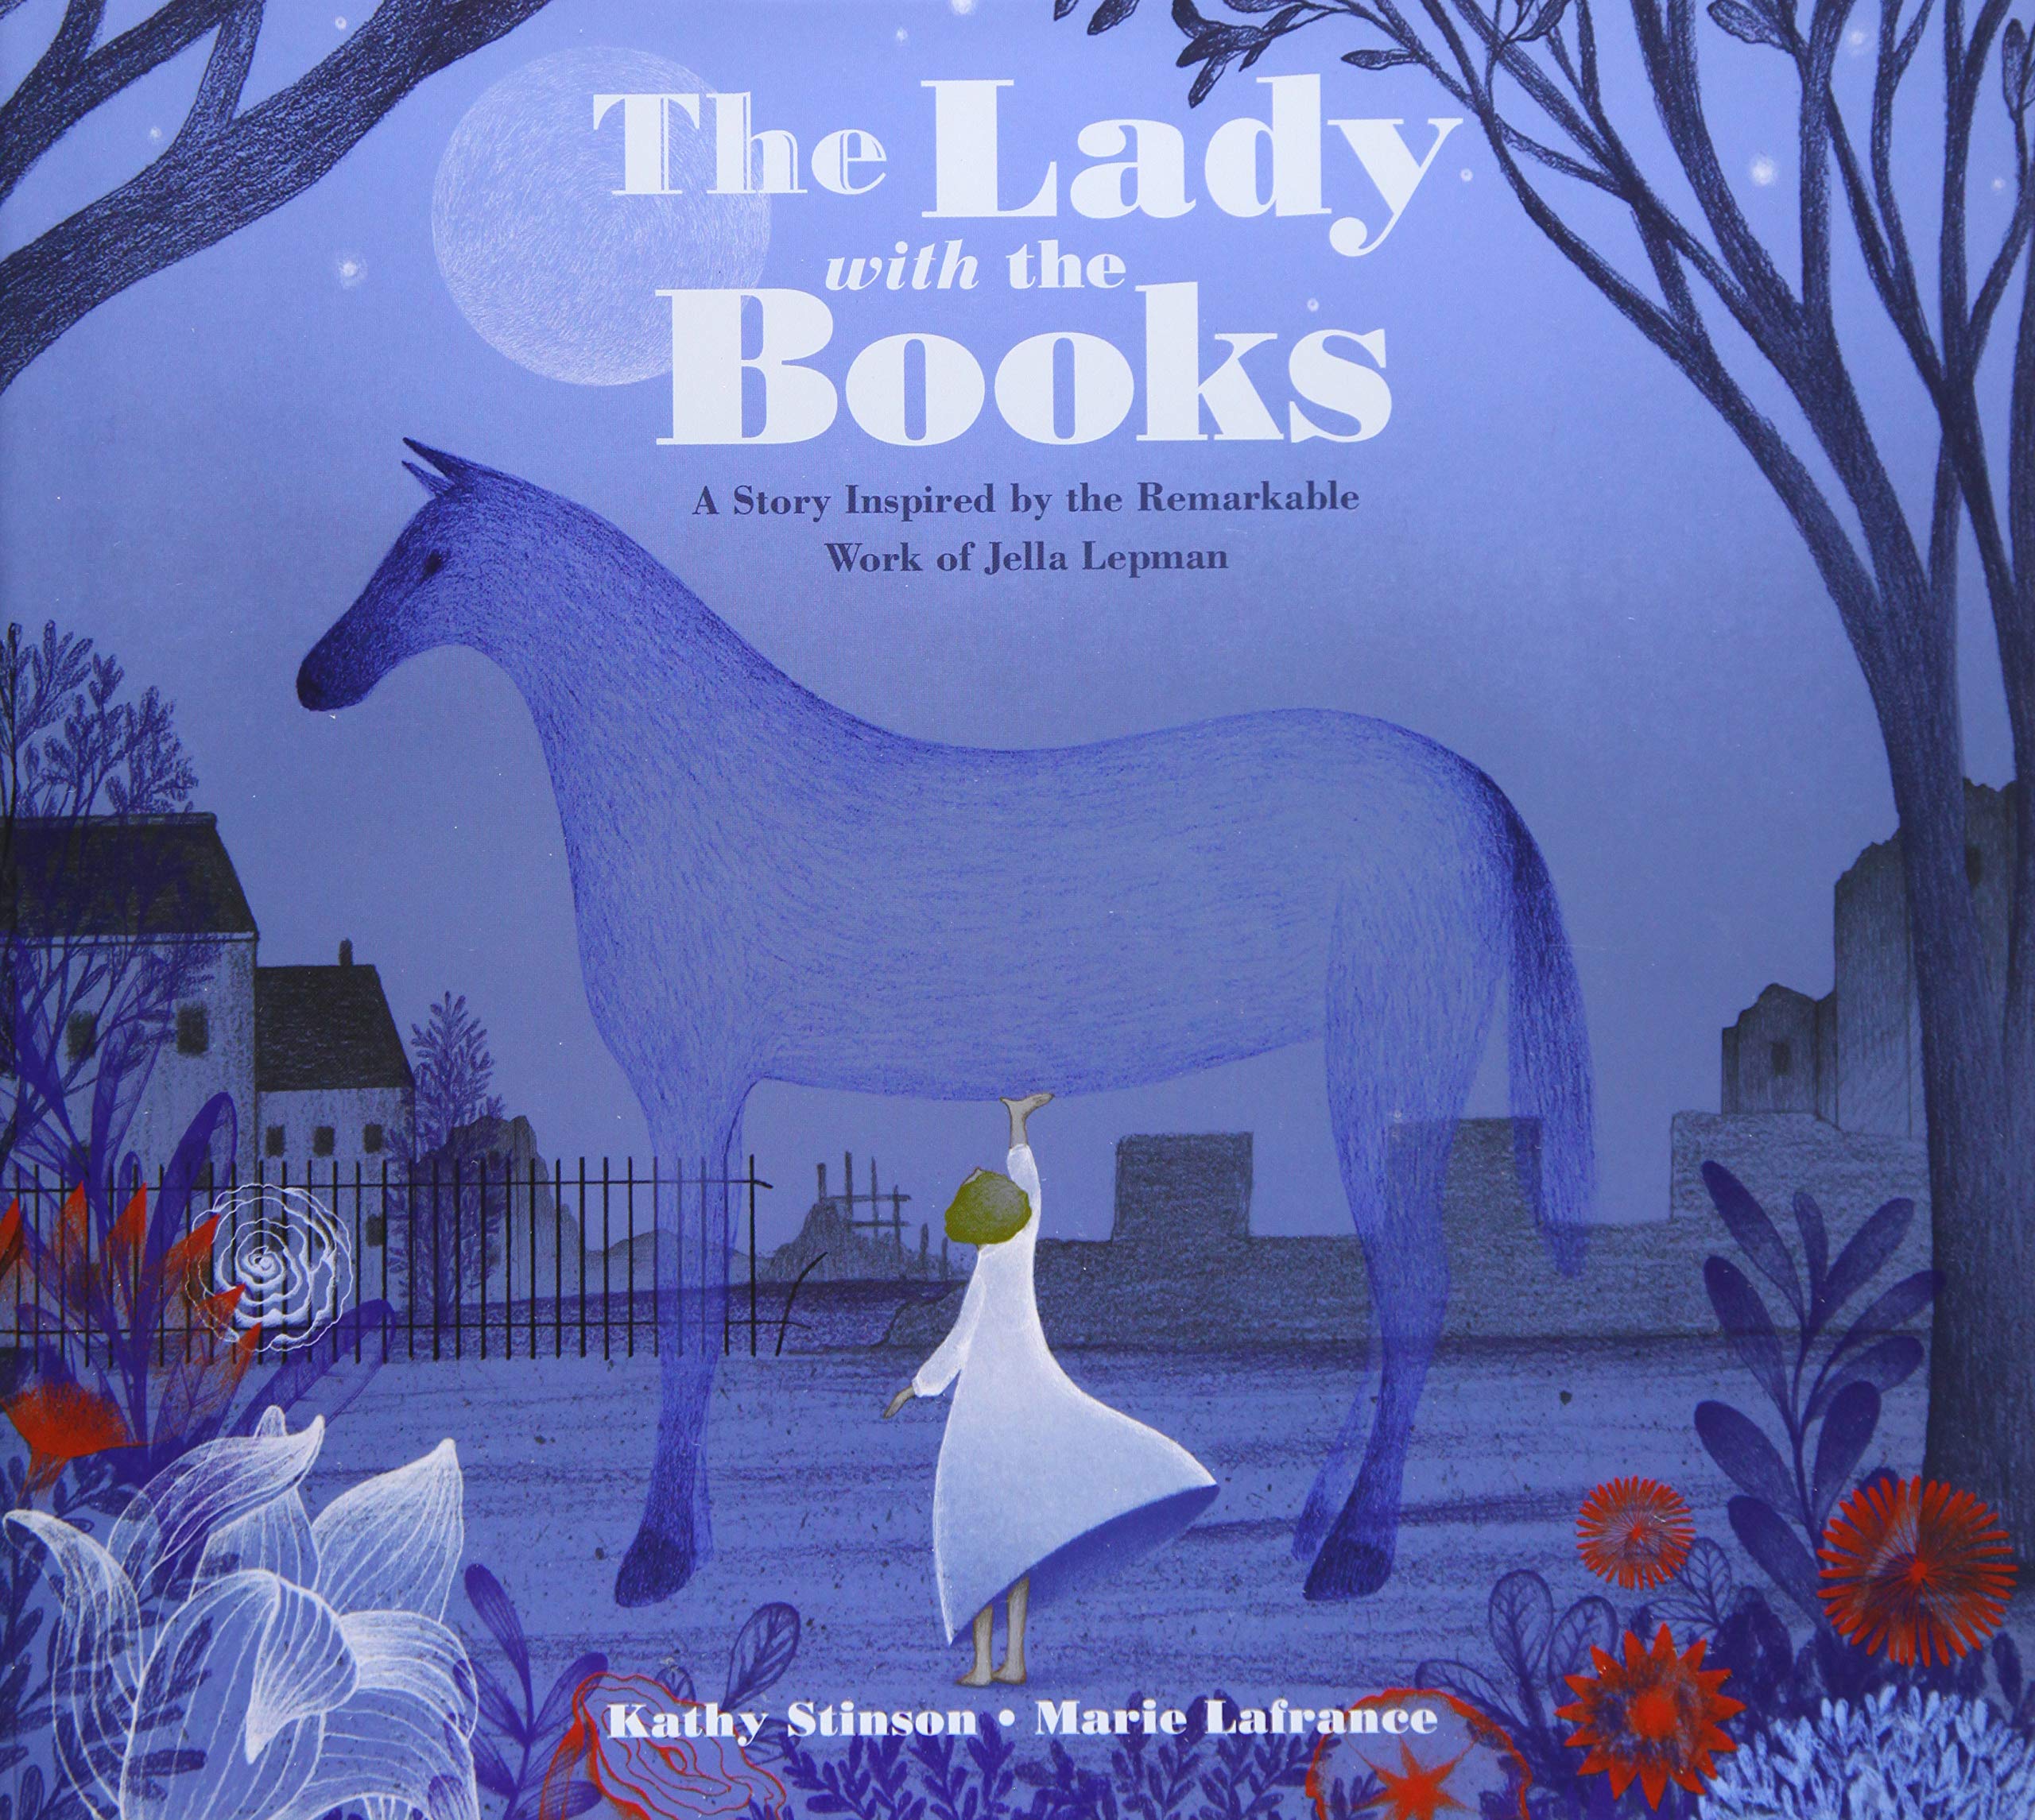 The lady with the books (cover)